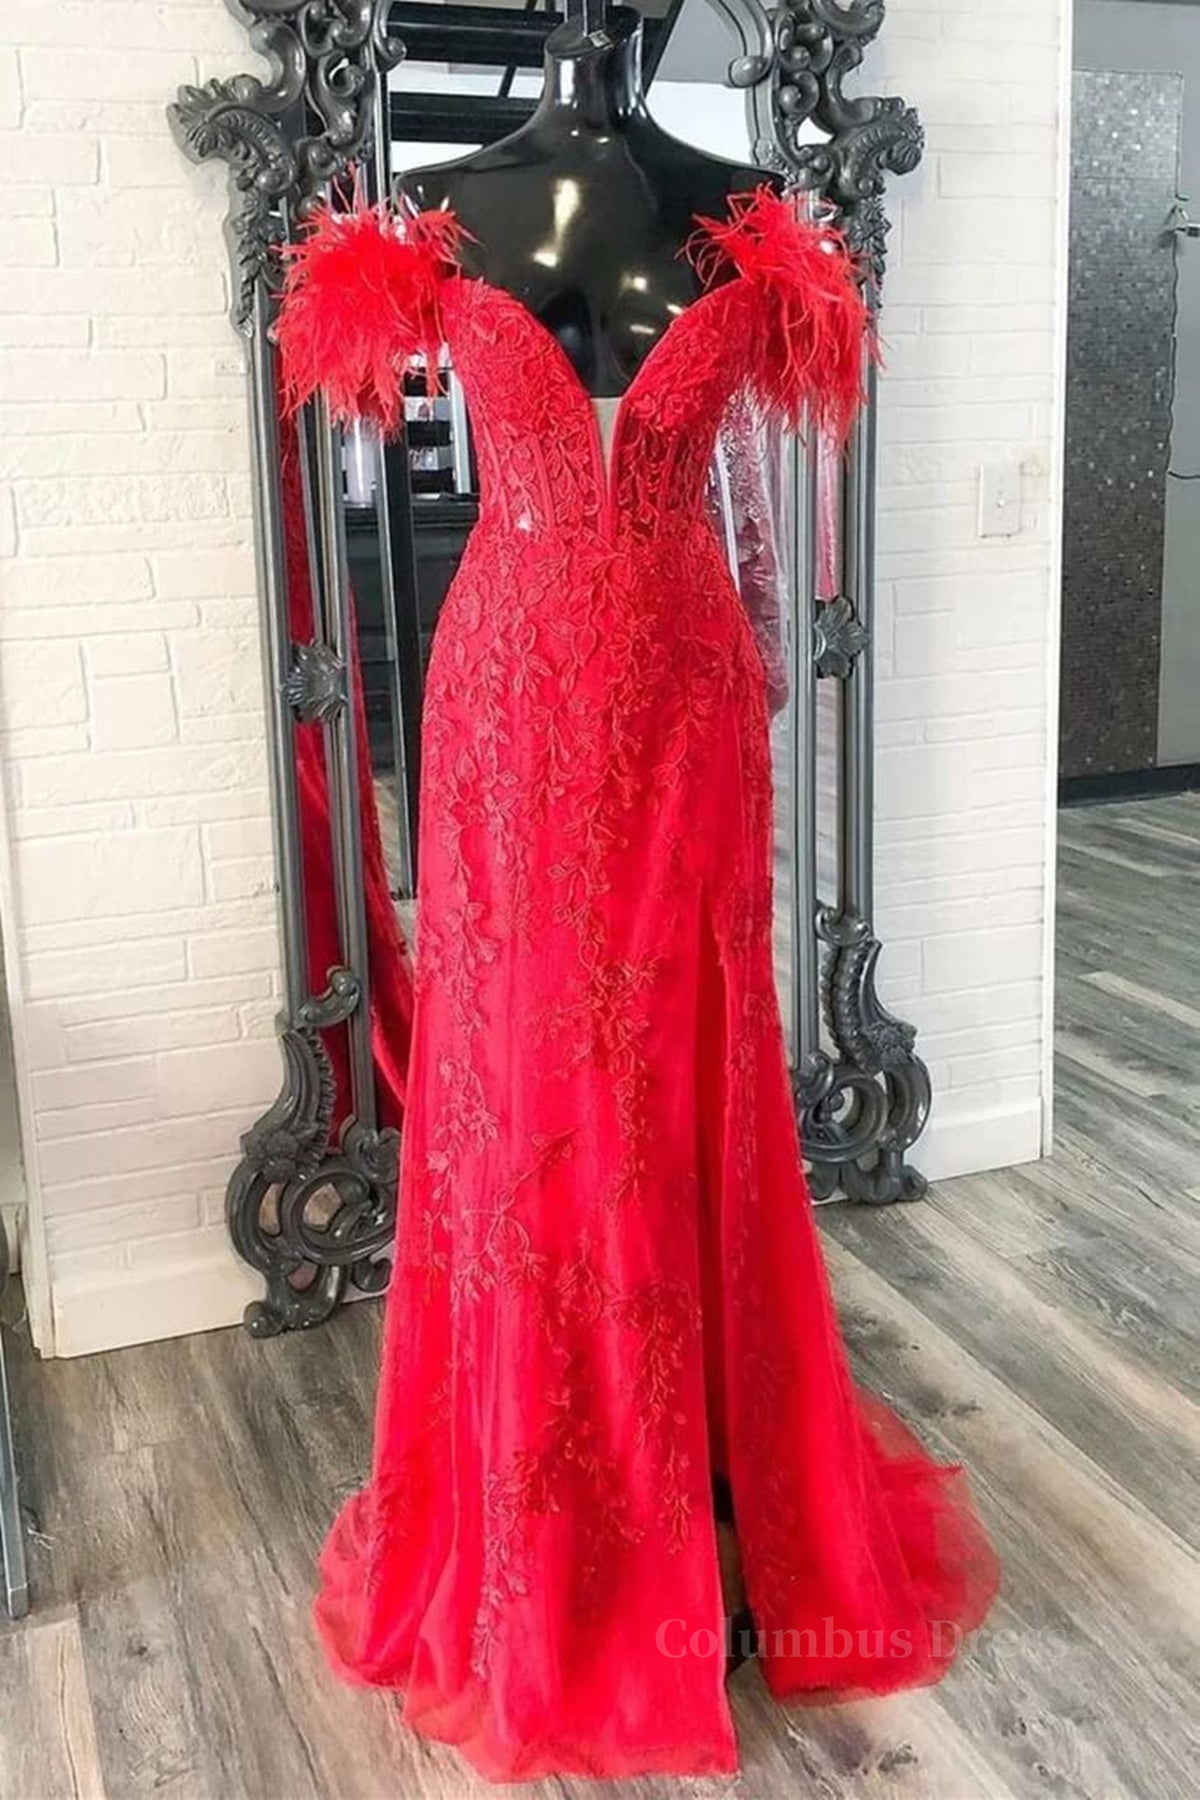 V Neck Mermaid Off Shoulder Red Lace Long Corset Prom Dress, Mermaid Red Corset Formal Dress, Red Lace Evening Dress outfit, Bridesmaids Dress Red